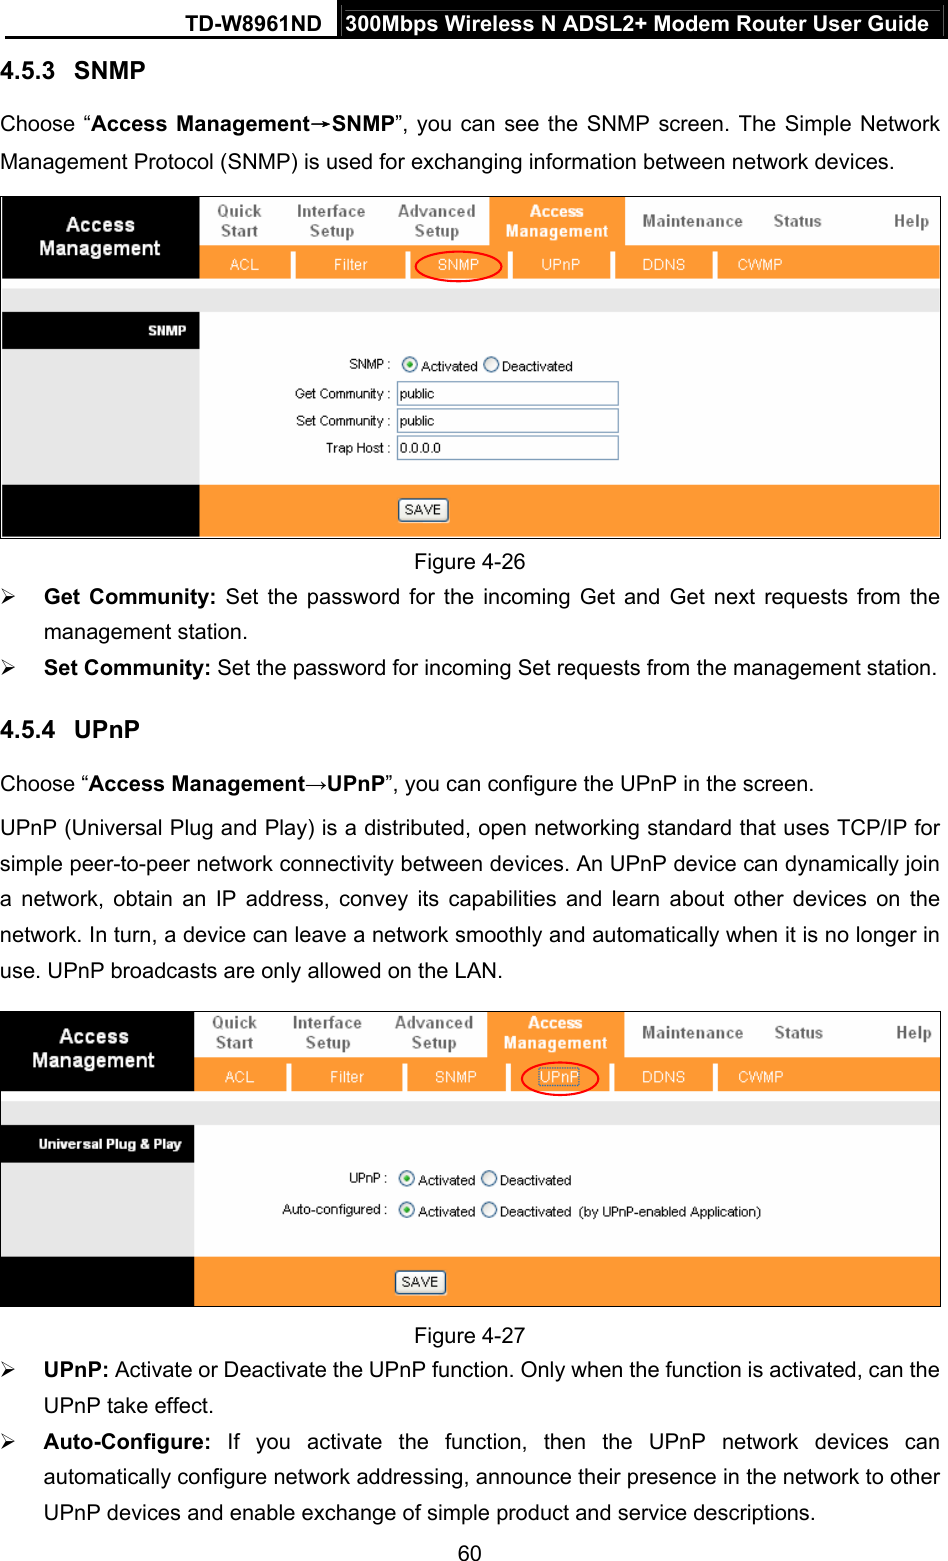 TD-W8961ND  300Mbps Wireless N ADSL2+ Modem Router User Guide  604.5.3  SNMP Choose “Access Management→SNMP”, you can see the SNMP screen. The Simple Network Management Protocol (SNMP) is used for exchanging information between network devices.  Figure 4-26  Get Community: Set the password for the incoming Get and Get next requests from the management station.  Set Community: Set the password for incoming Set requests from the management station. 4.5.4  UPnP Choose “Access Management→UPnP”, you can configure the UPnP in the screen. UPnP (Universal Plug and Play) is a distributed, open networking standard that uses TCP/IP for simple peer-to-peer network connectivity between devices. An UPnP device can dynamically join a network, obtain an IP address, convey its capabilities and learn about other devices on the network. In turn, a device can leave a network smoothly and automatically when it is no longer in use. UPnP broadcasts are only allowed on the LAN.  Figure 4-27  UPnP: Activate or Deactivate the UPnP function. Only when the function is activated, can the UPnP take effect.  Auto-Configure: If you activate the function, then the UPnP network devices can automatically configure network addressing, announce their presence in the network to other UPnP devices and enable exchange of simple product and service descriptions. 